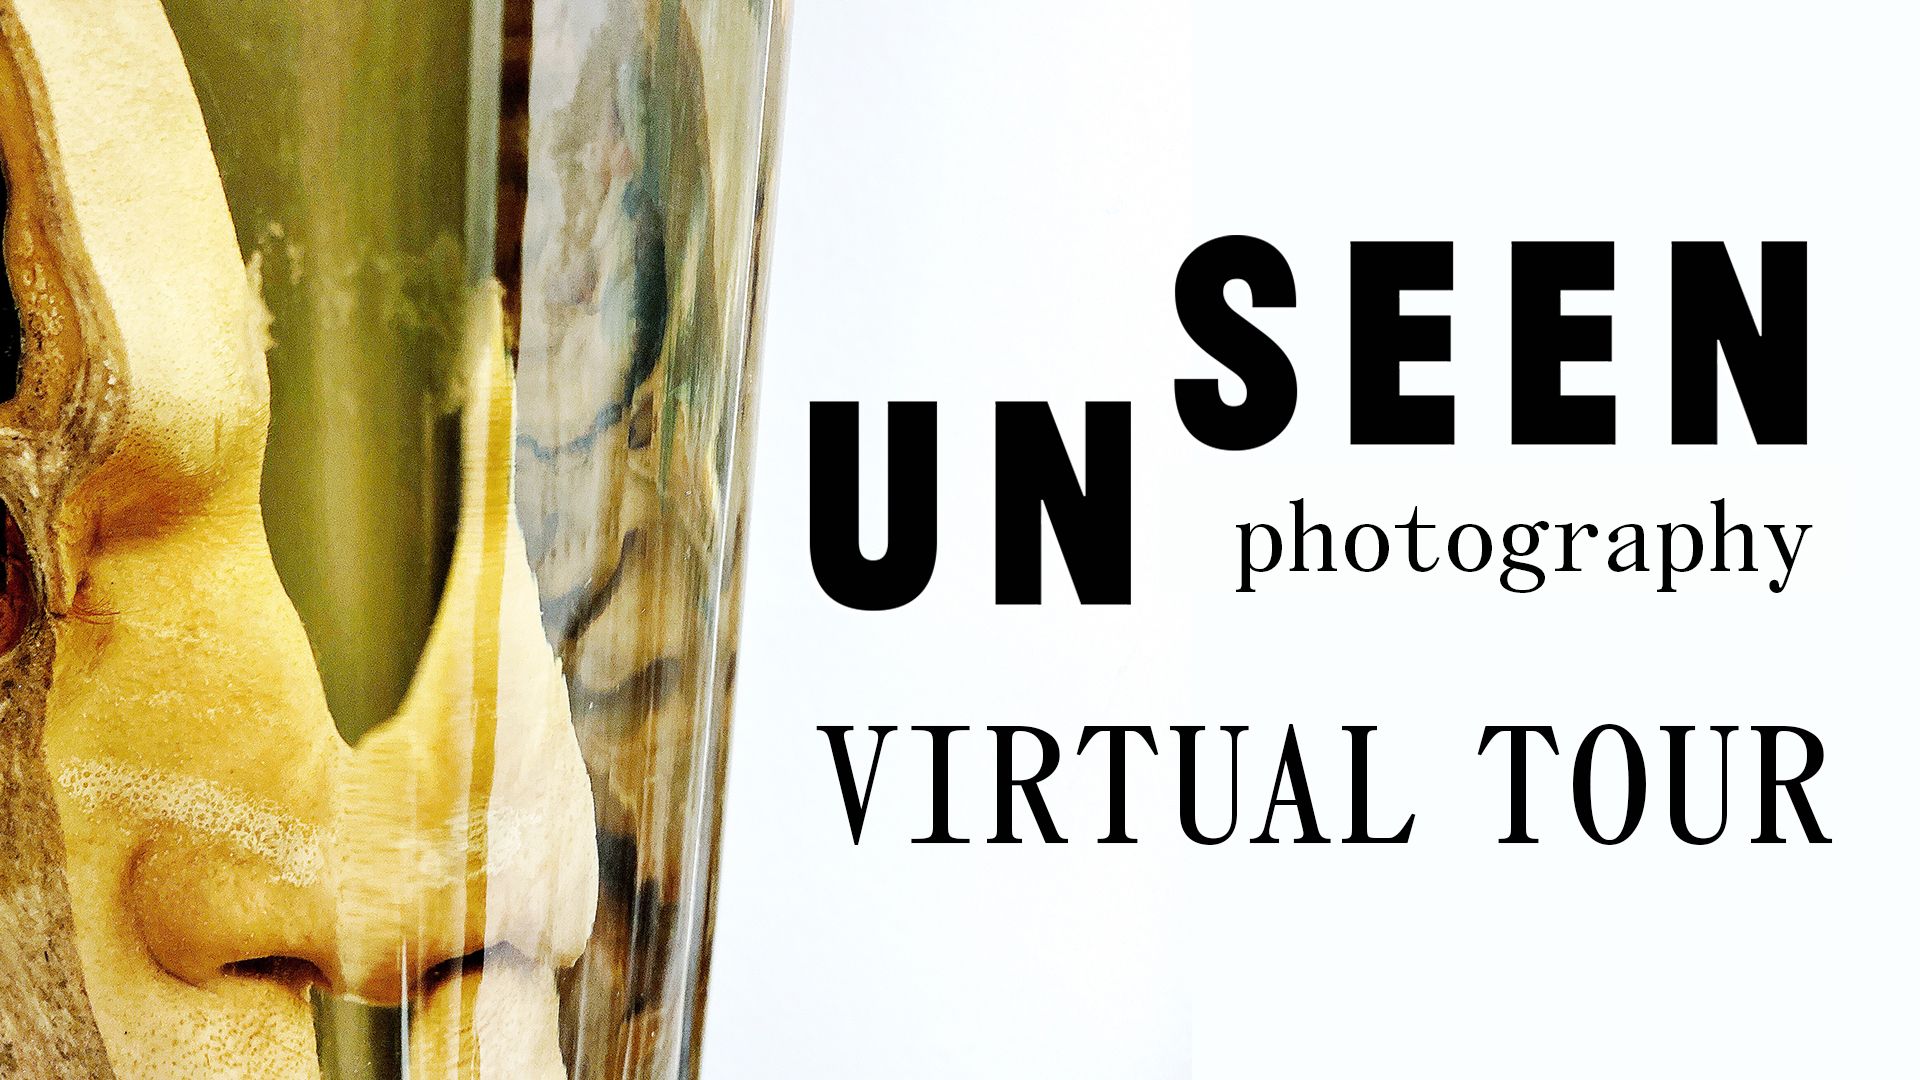 The text Unseen Photography Virtual Tour alongside an image collage